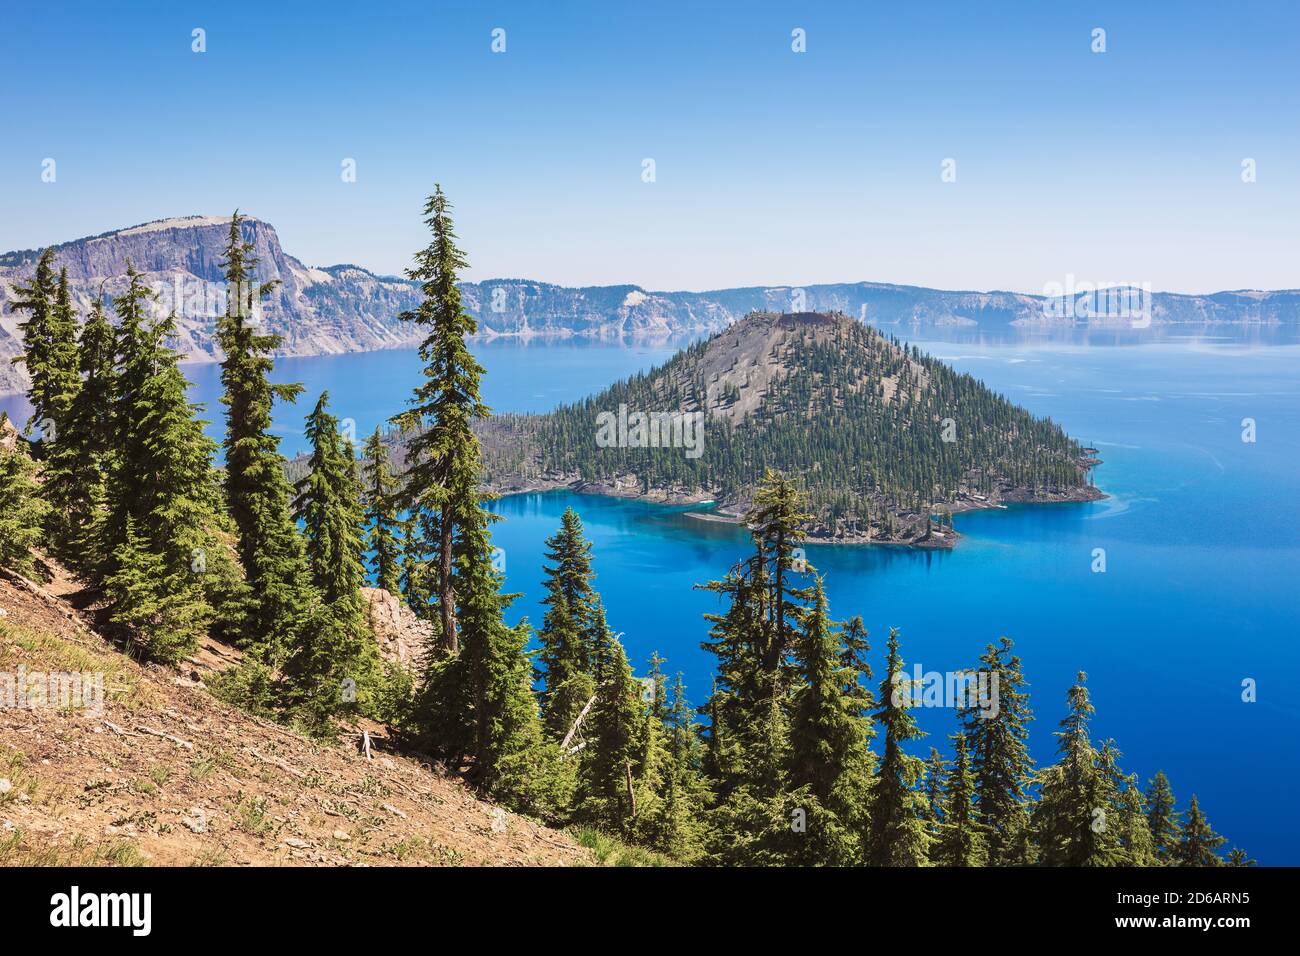 Scenic view of Wizard Island in Crater Lake National Park, Oregon, USA Stock Photo